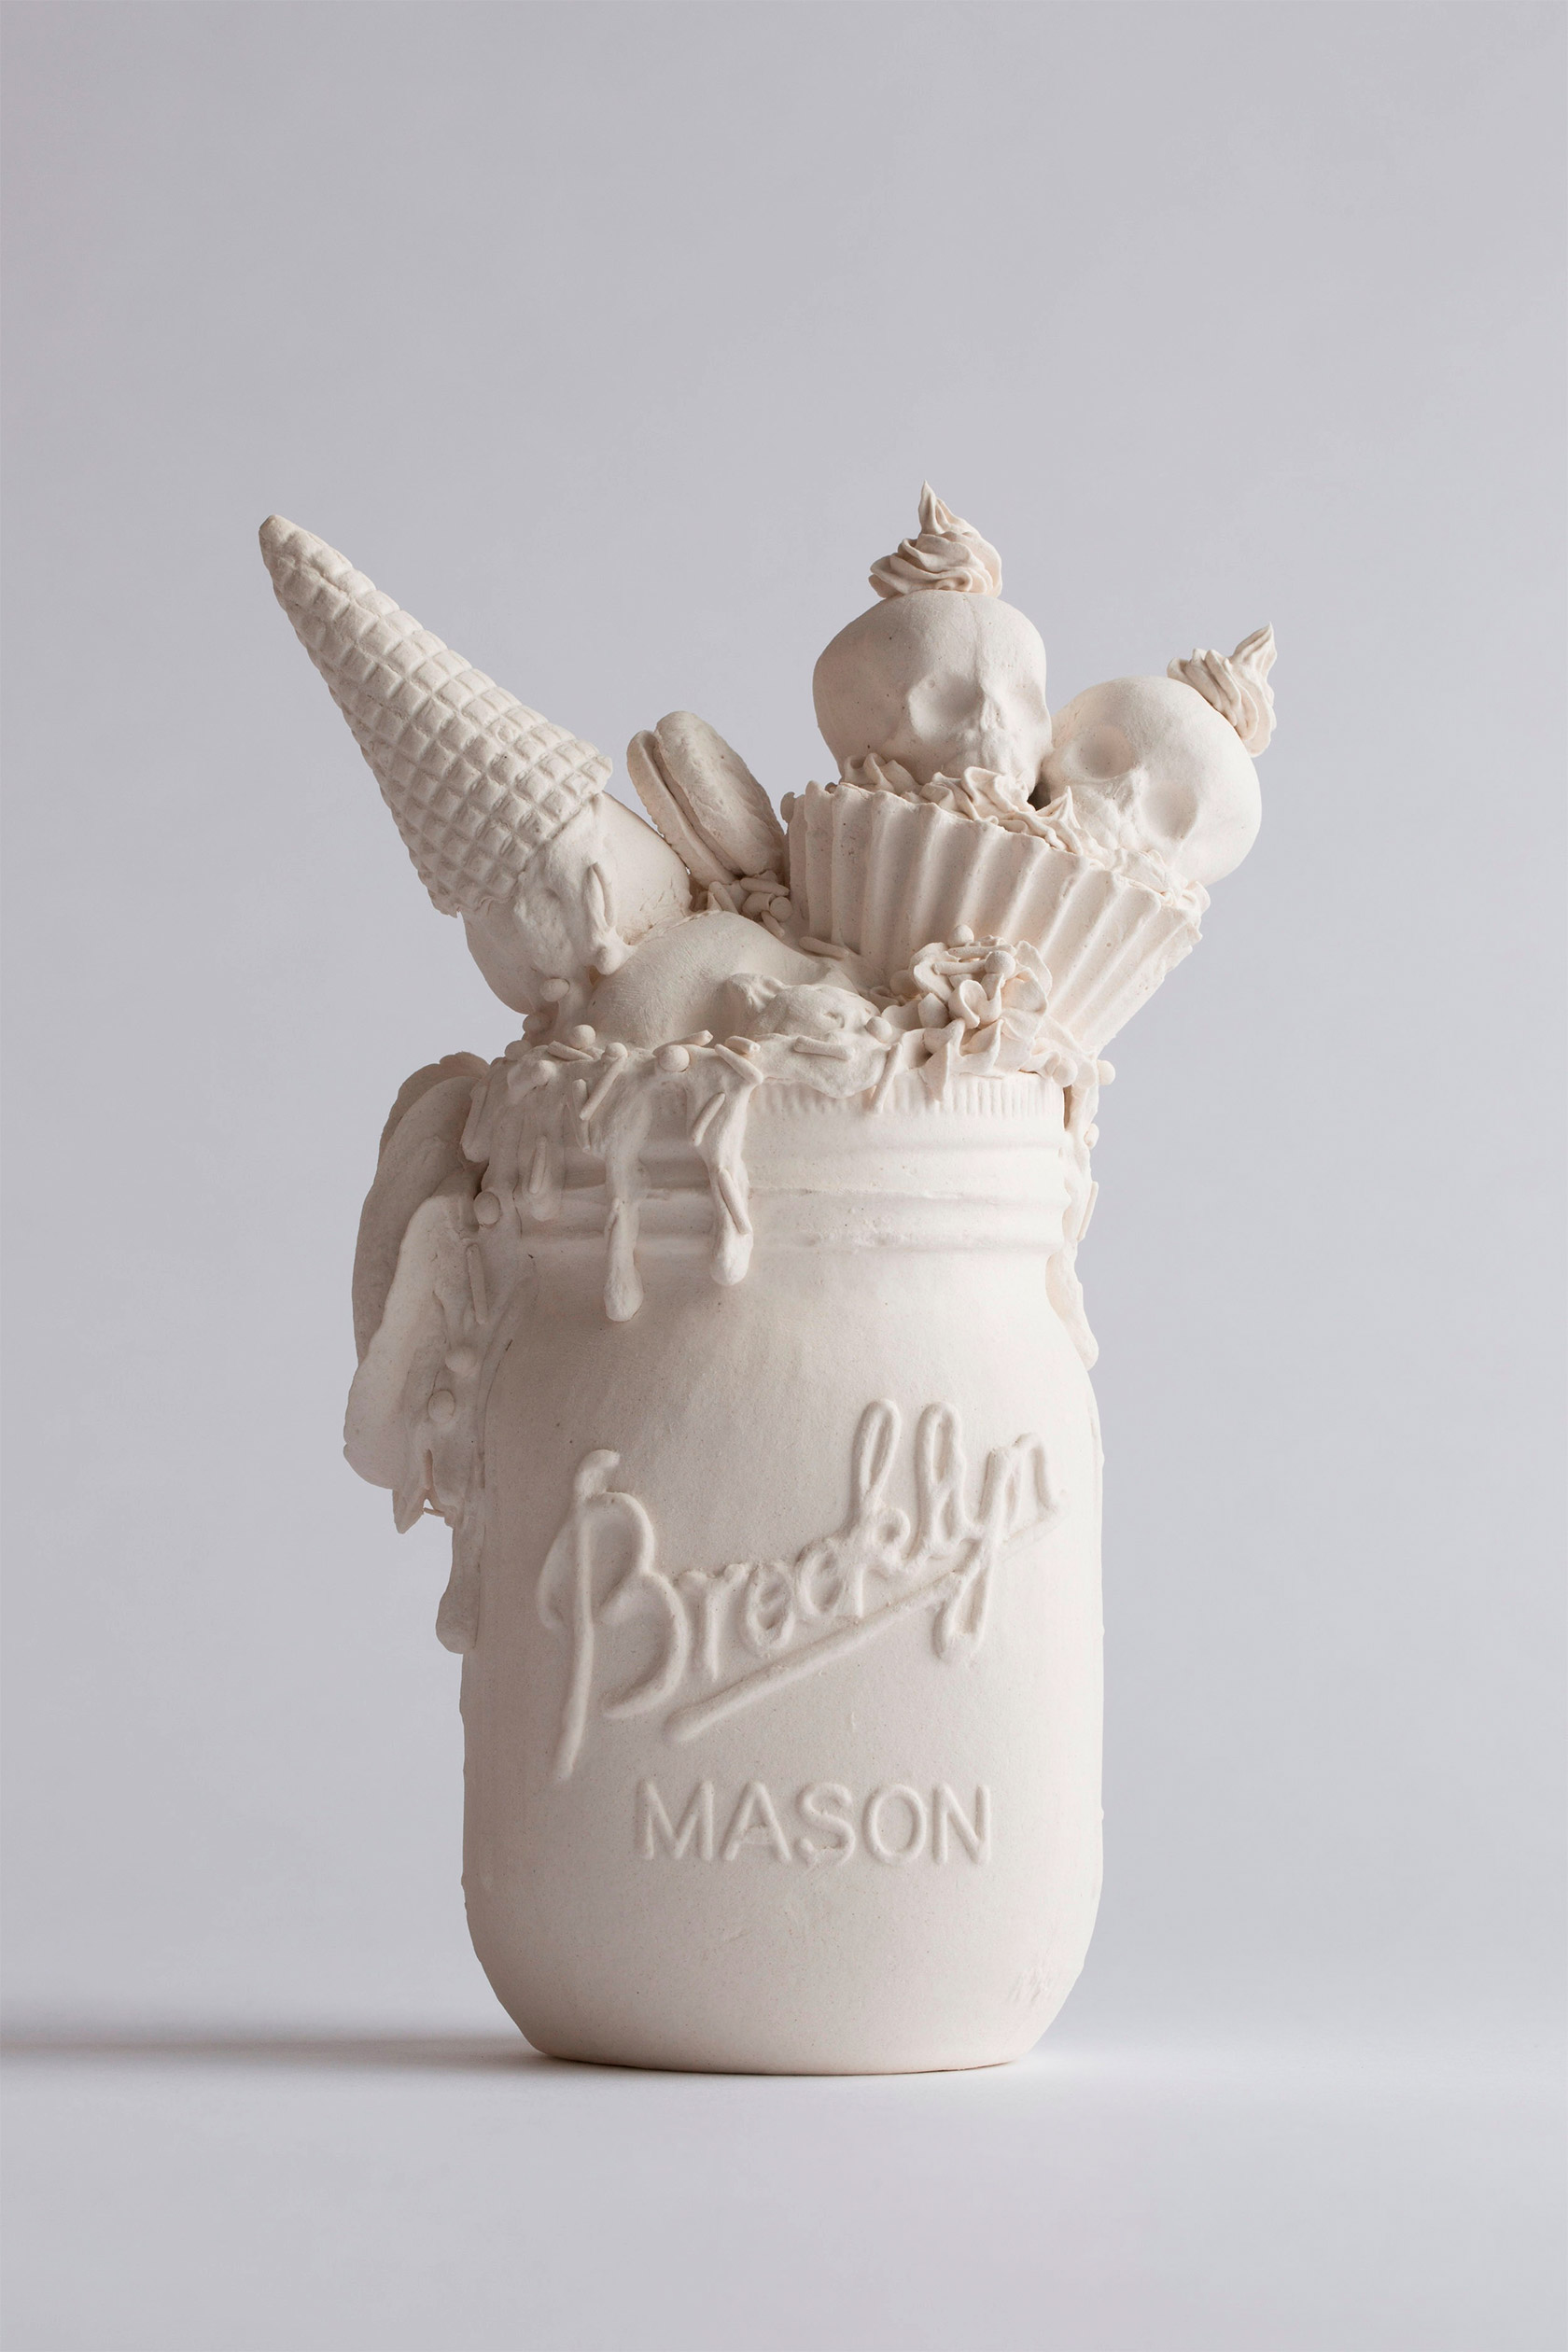 Death by Sugar: Porcelain Sculptures by Jacqueline Tse | Daily design  inspiration for creatives | Inspiration Grid